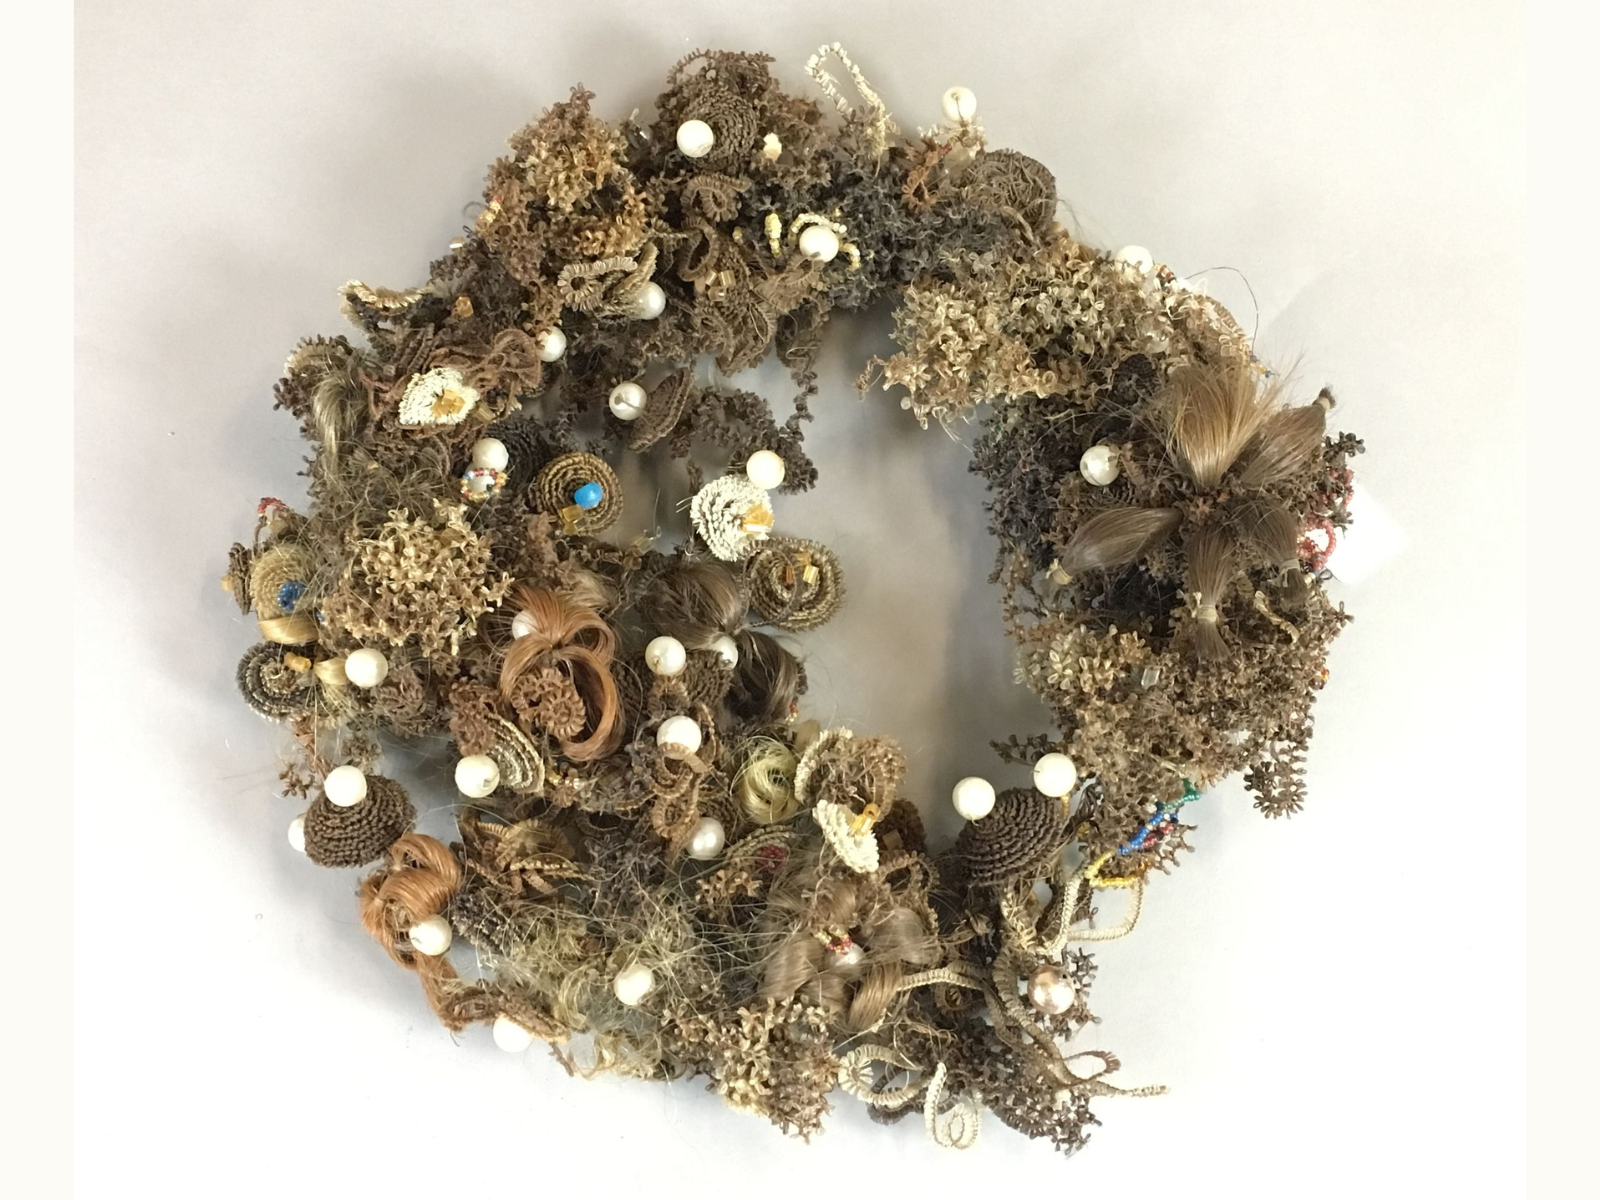 A haighly decorative wreath woven of varying shades of brown and blonde human hair, with occasional accent beads.